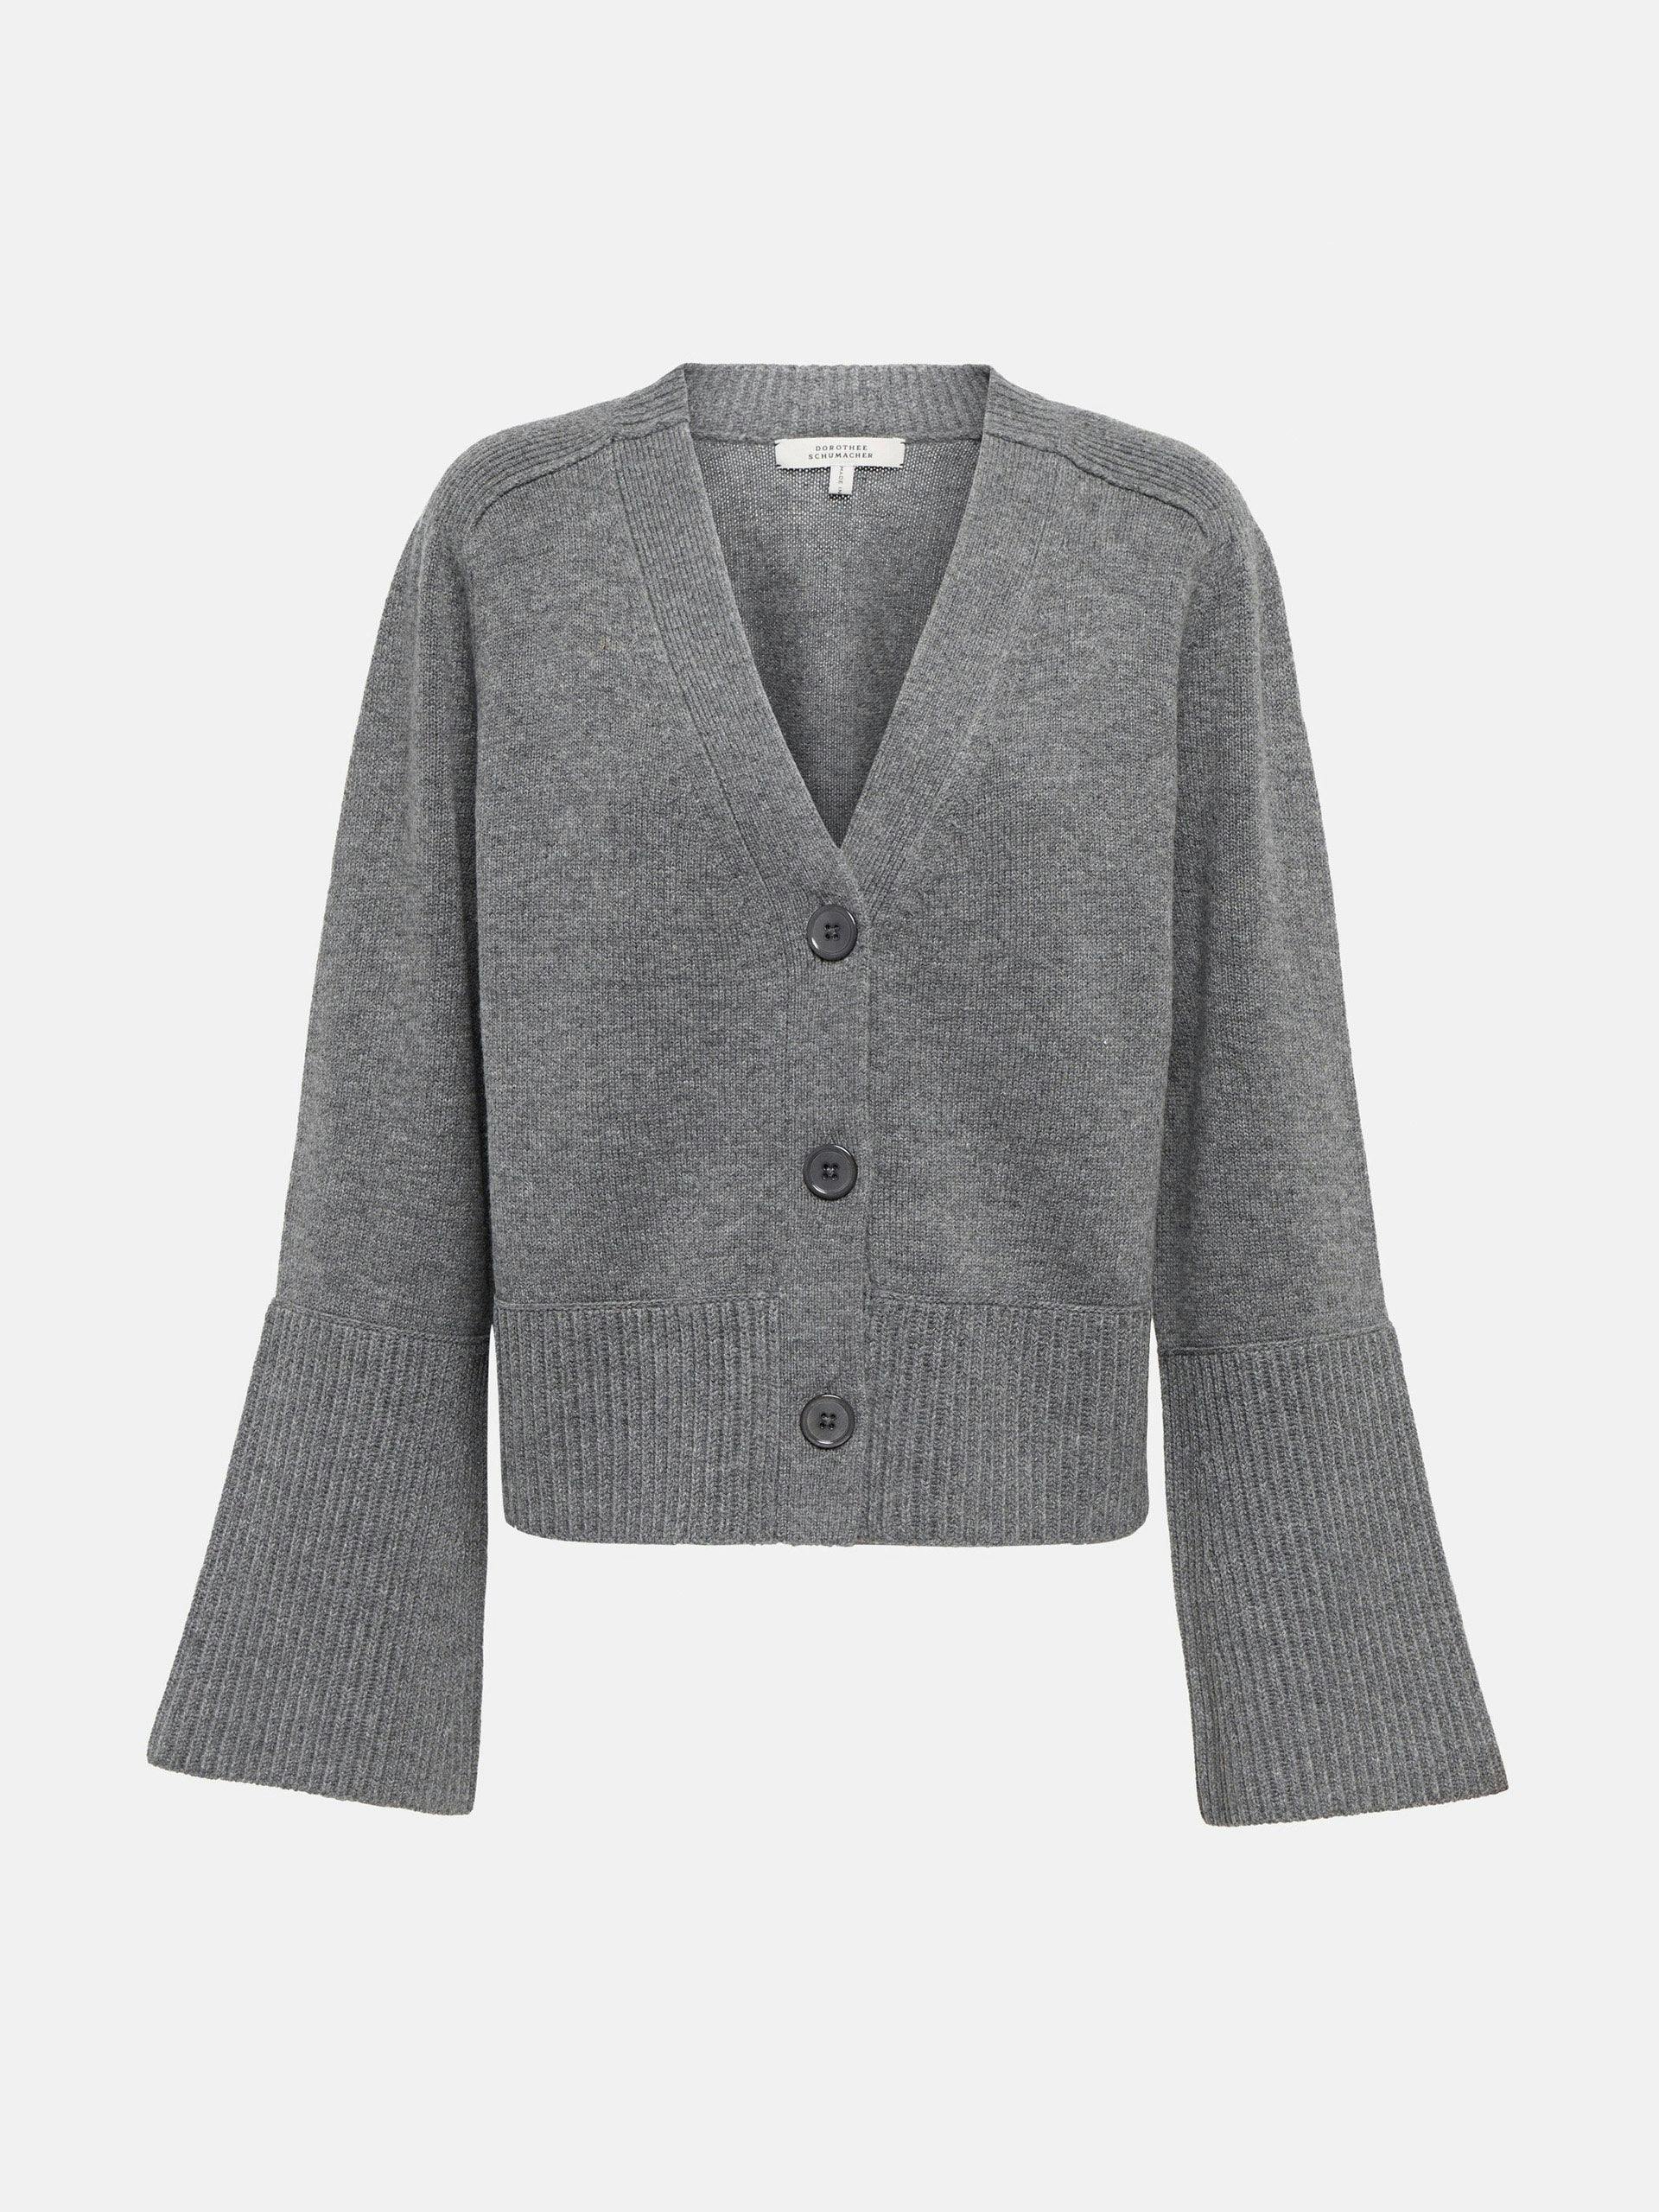 Grey wool and cashmere cardigan